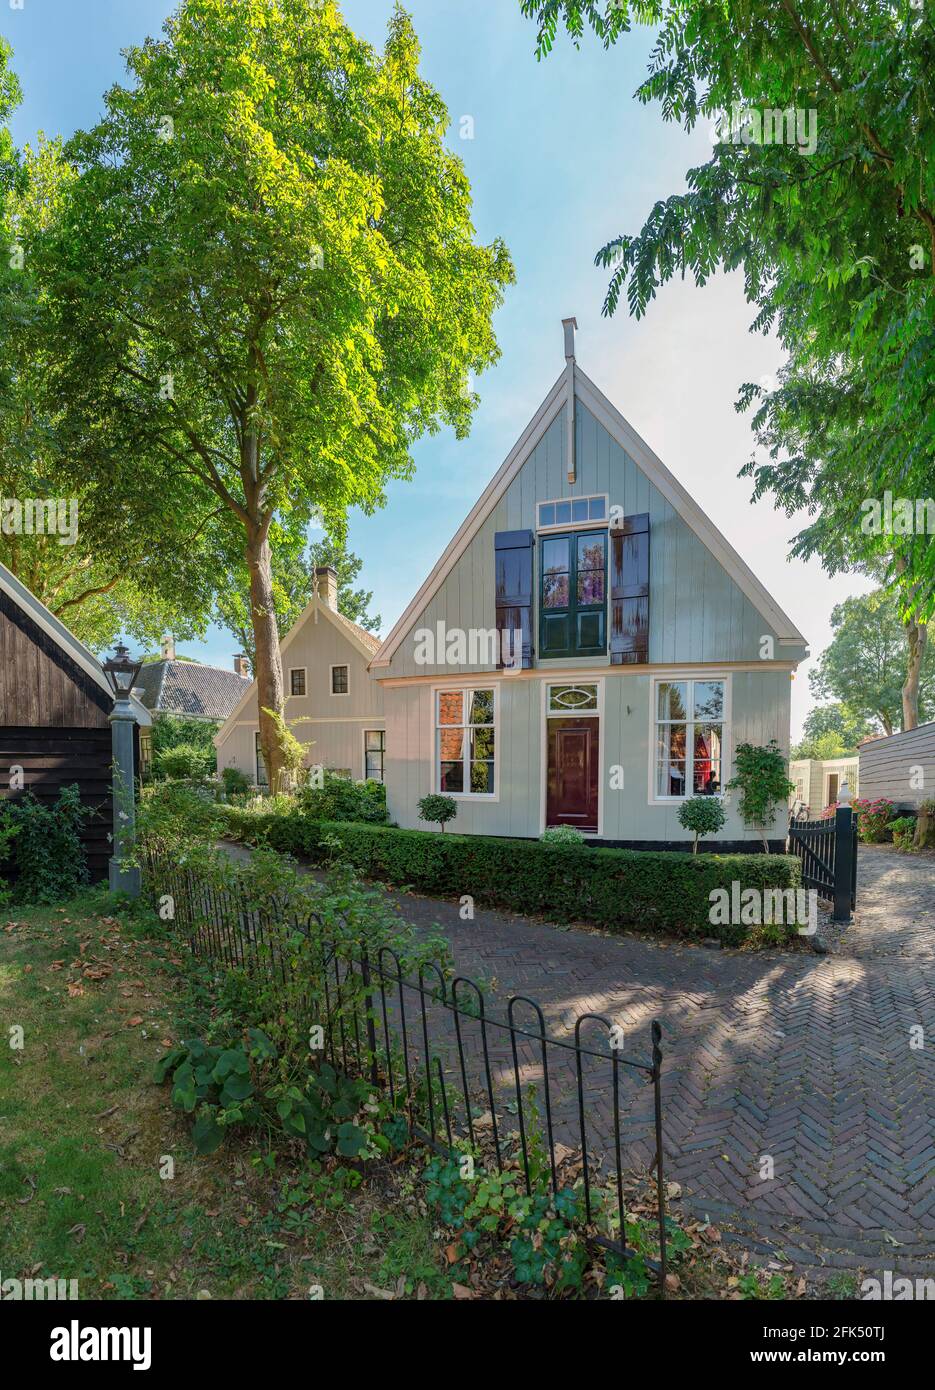 Wooden house *** Local Caption *** Broek in Waterland, Noord-Holland,  Netherlands, city, village, forest, wood, trees, summer Stock Photo - Alamy